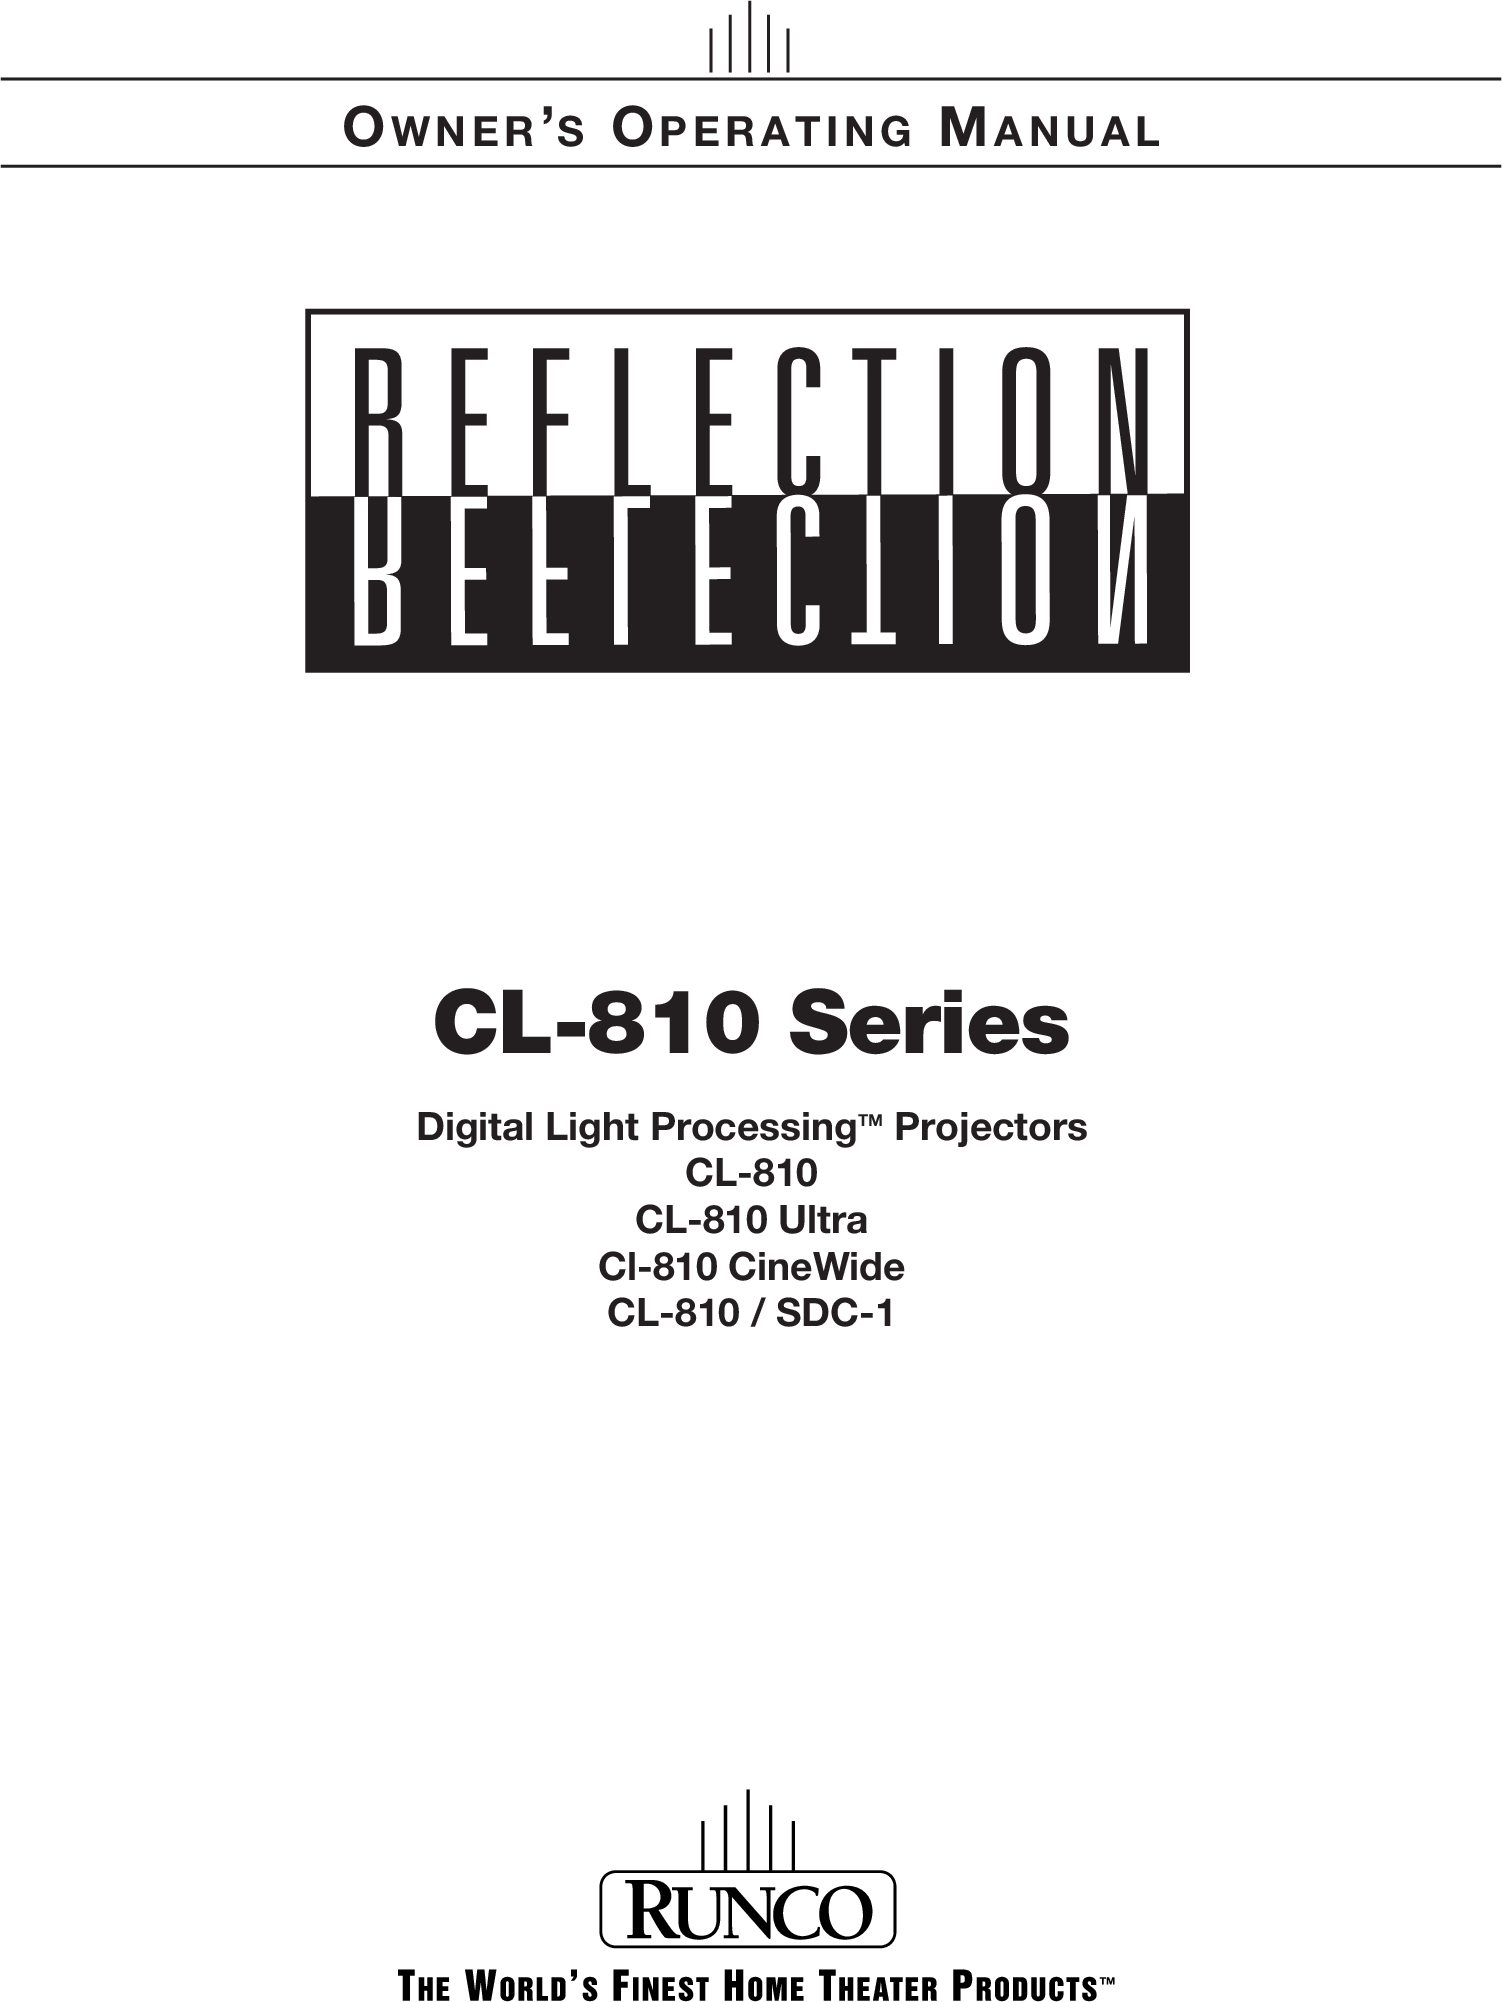 Page 1 of 1 - Runco Runco-Cl-810-Cl-810-Ultra-Cl-810-Cinewide-Cl-810-Sdc-1-Users-Manual-  Runco-cl-810-cl-810-ultra-cl-810-cinewide-cl-810-sdc-1-users-manual